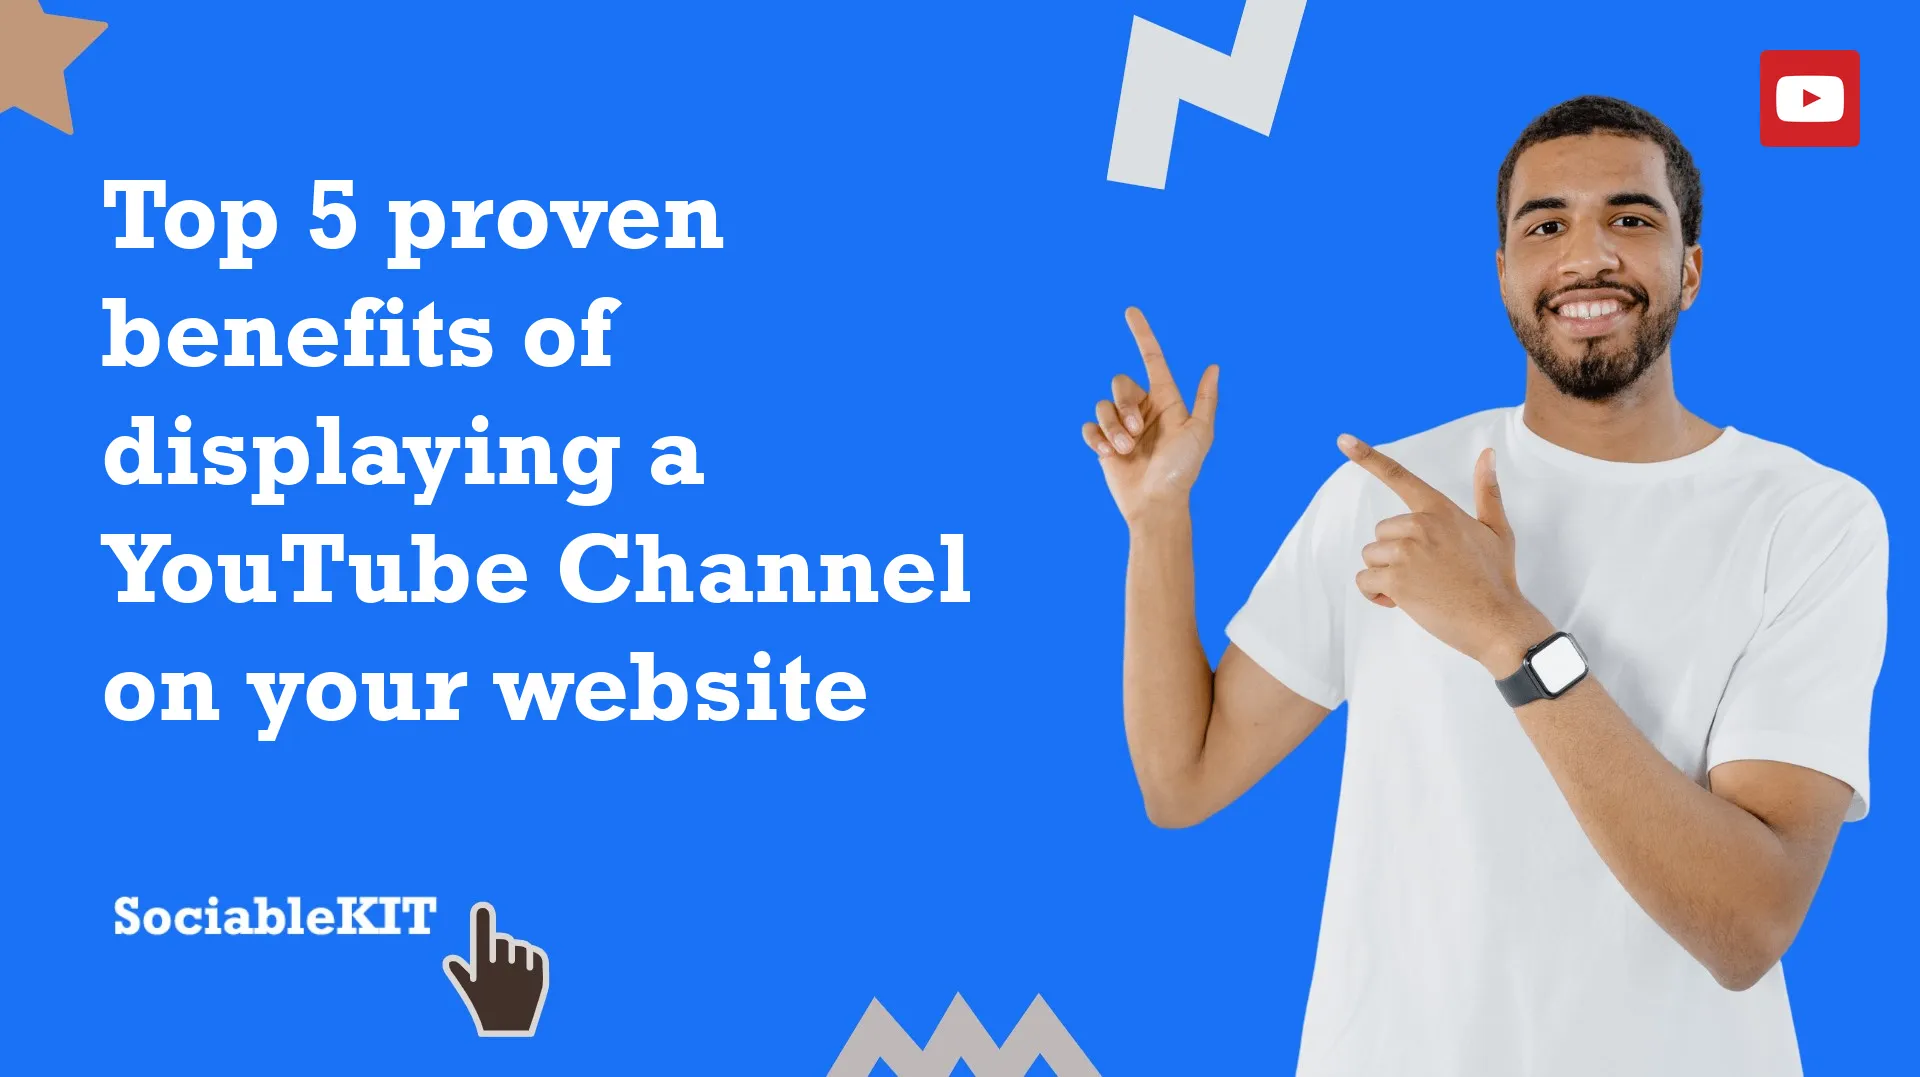 Top 5 proven benefits of displaying a YouTube Channel on your website